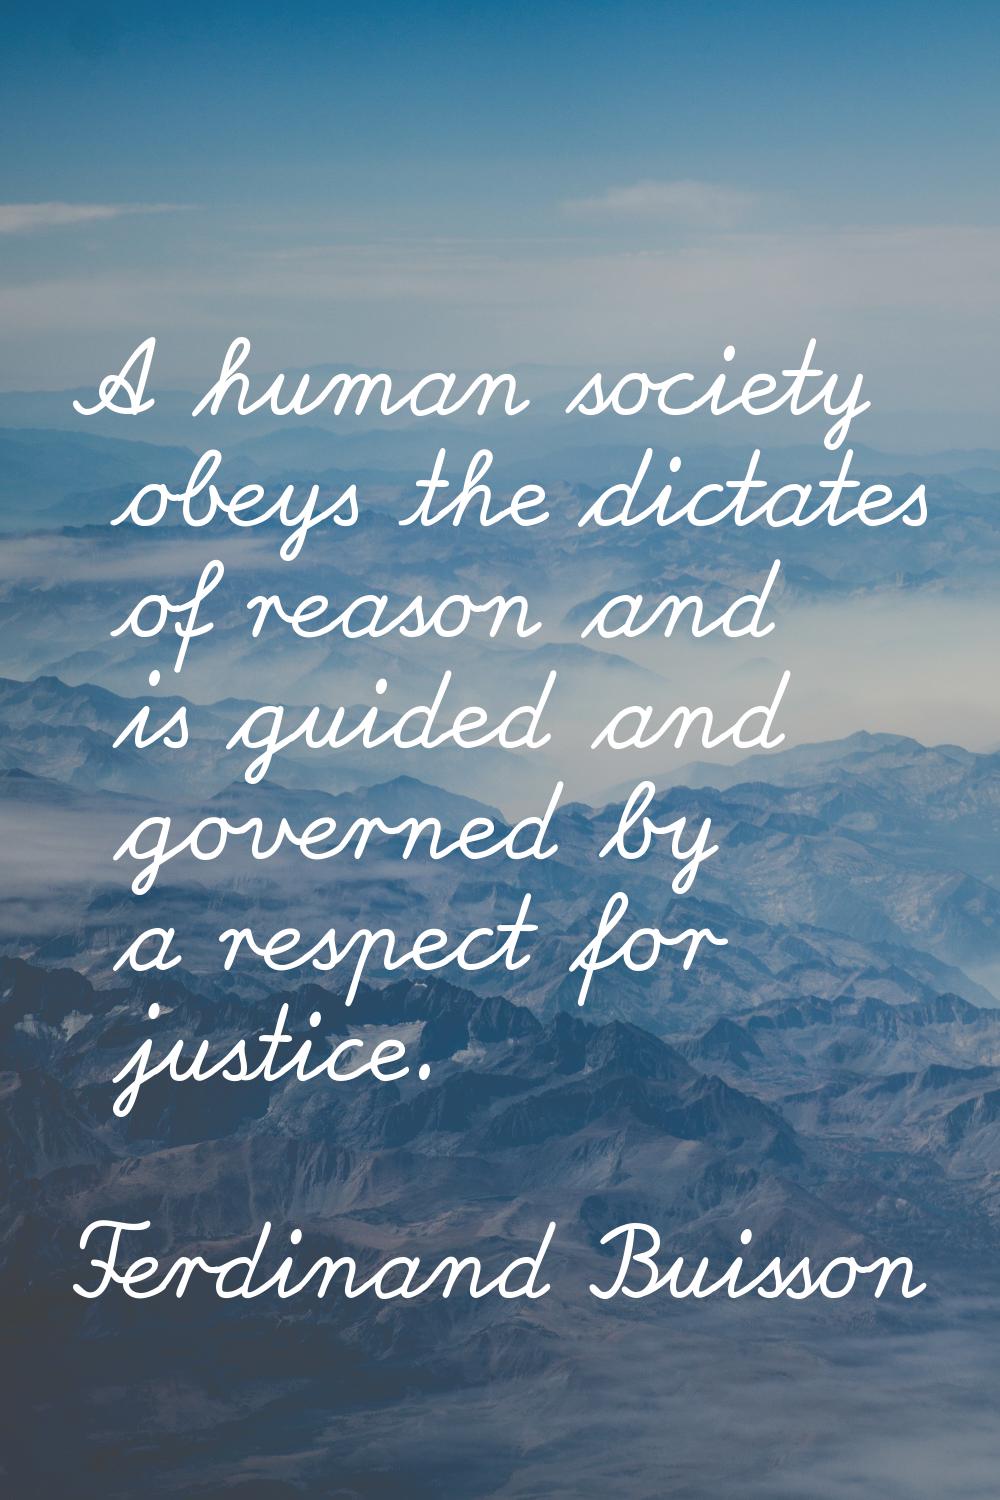 A human society obeys the dictates of reason and is guided and governed by a respect for justice.